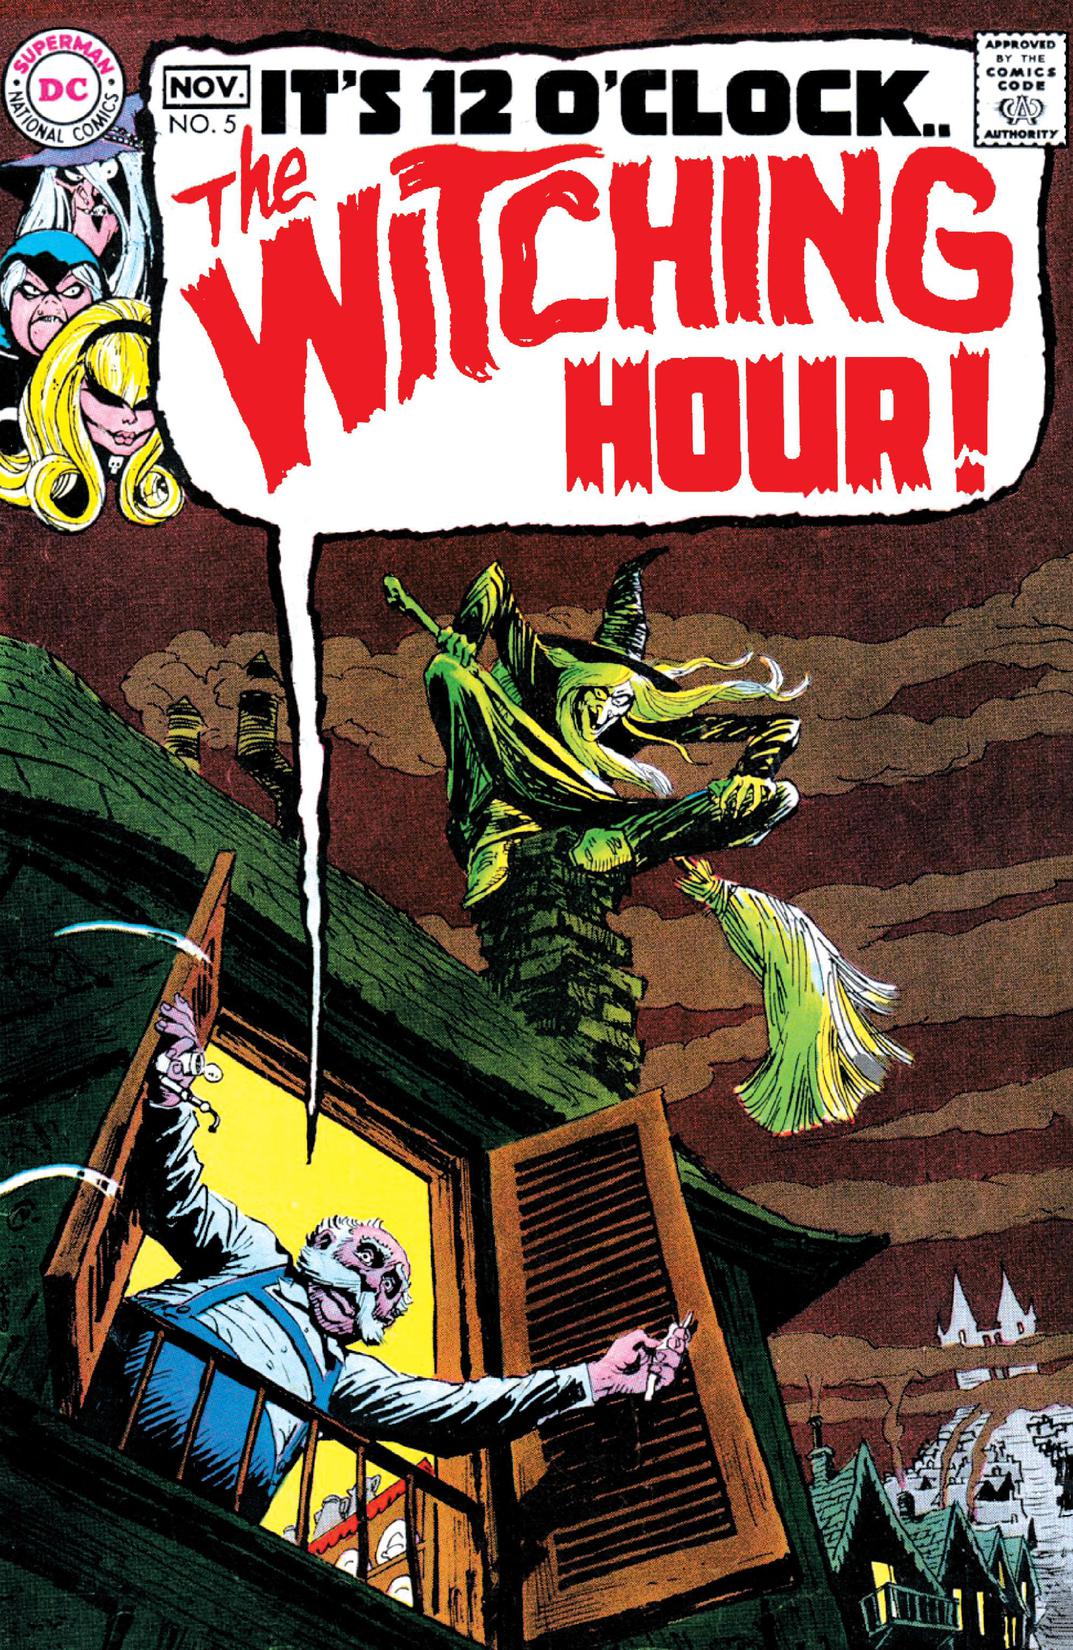 The Witching Hour #5 preview images